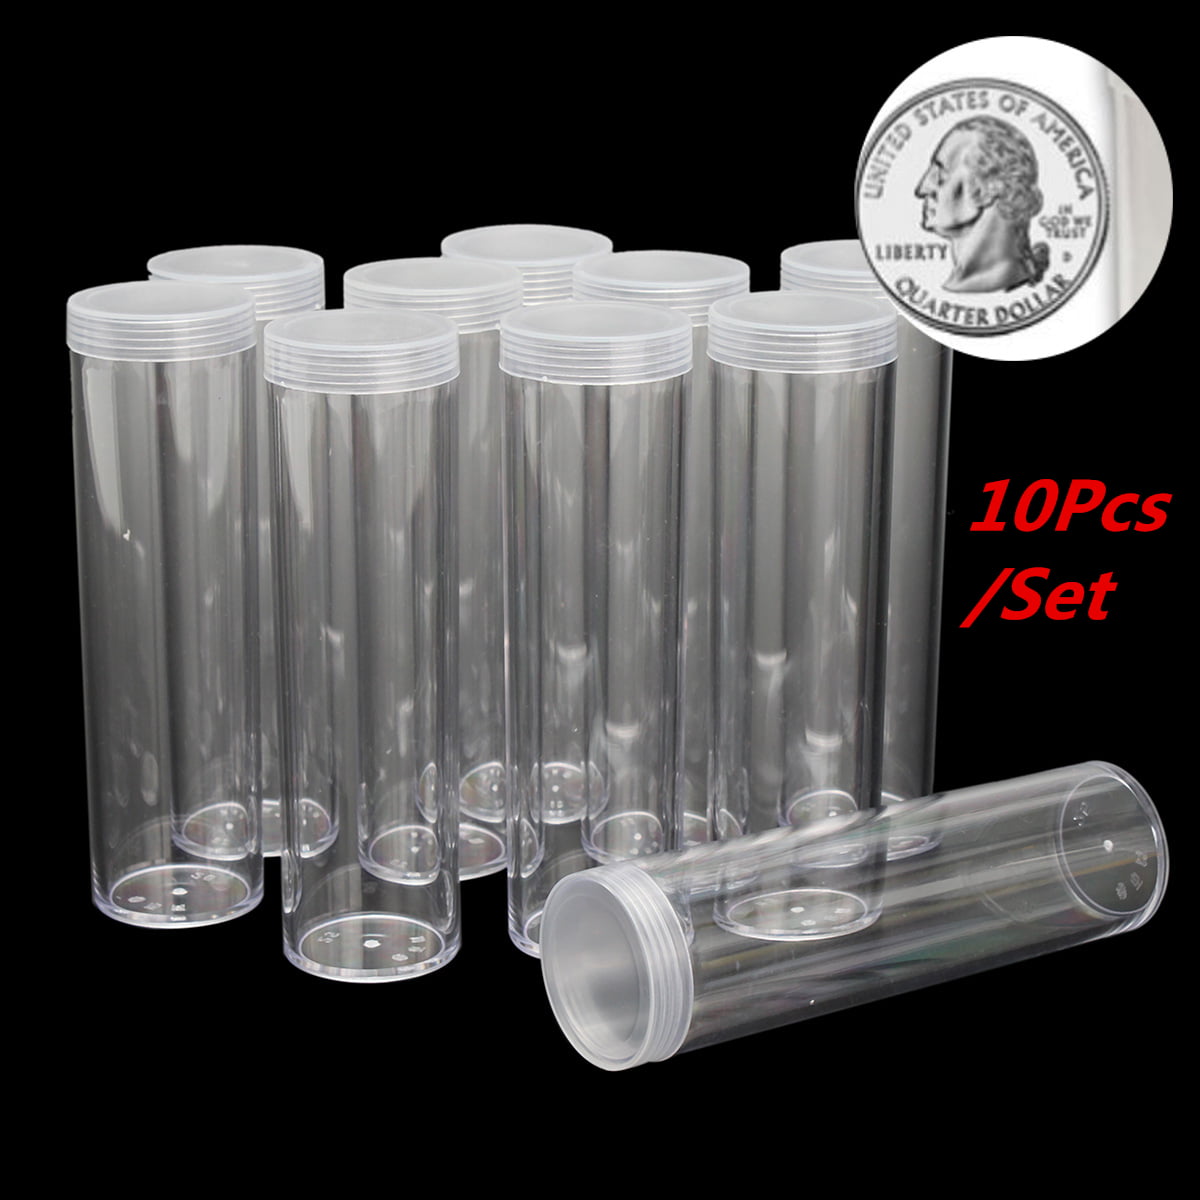 Round Nickel Coin Tube Storage Box Blue comes with 50 Round Coin Tubes